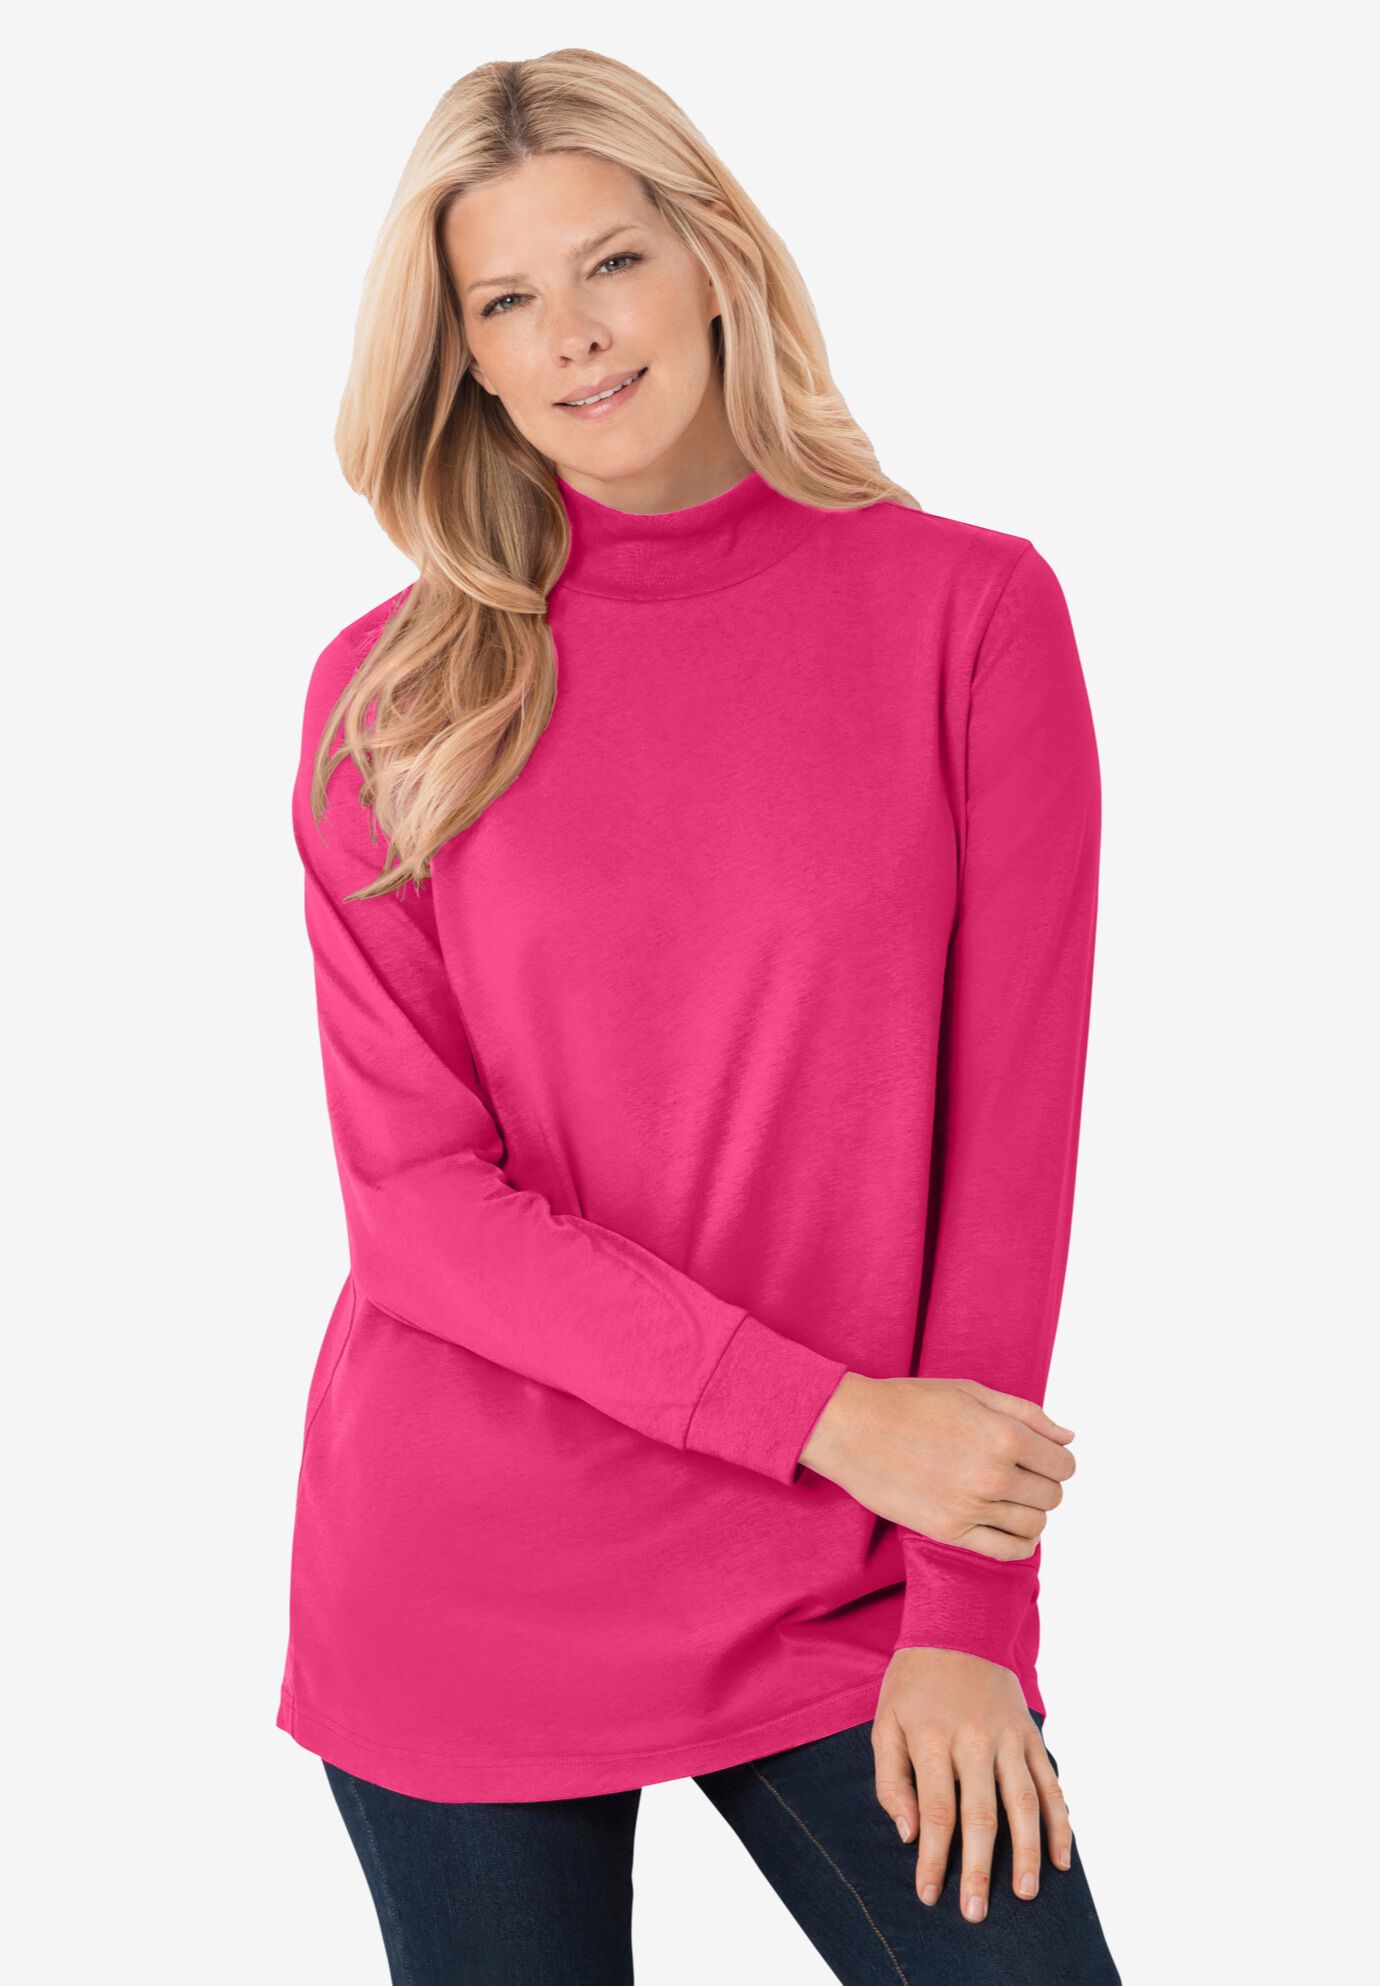 Woman Within Womens Plus Size Petite Perfect Long Sleeve Mock Turtleneck